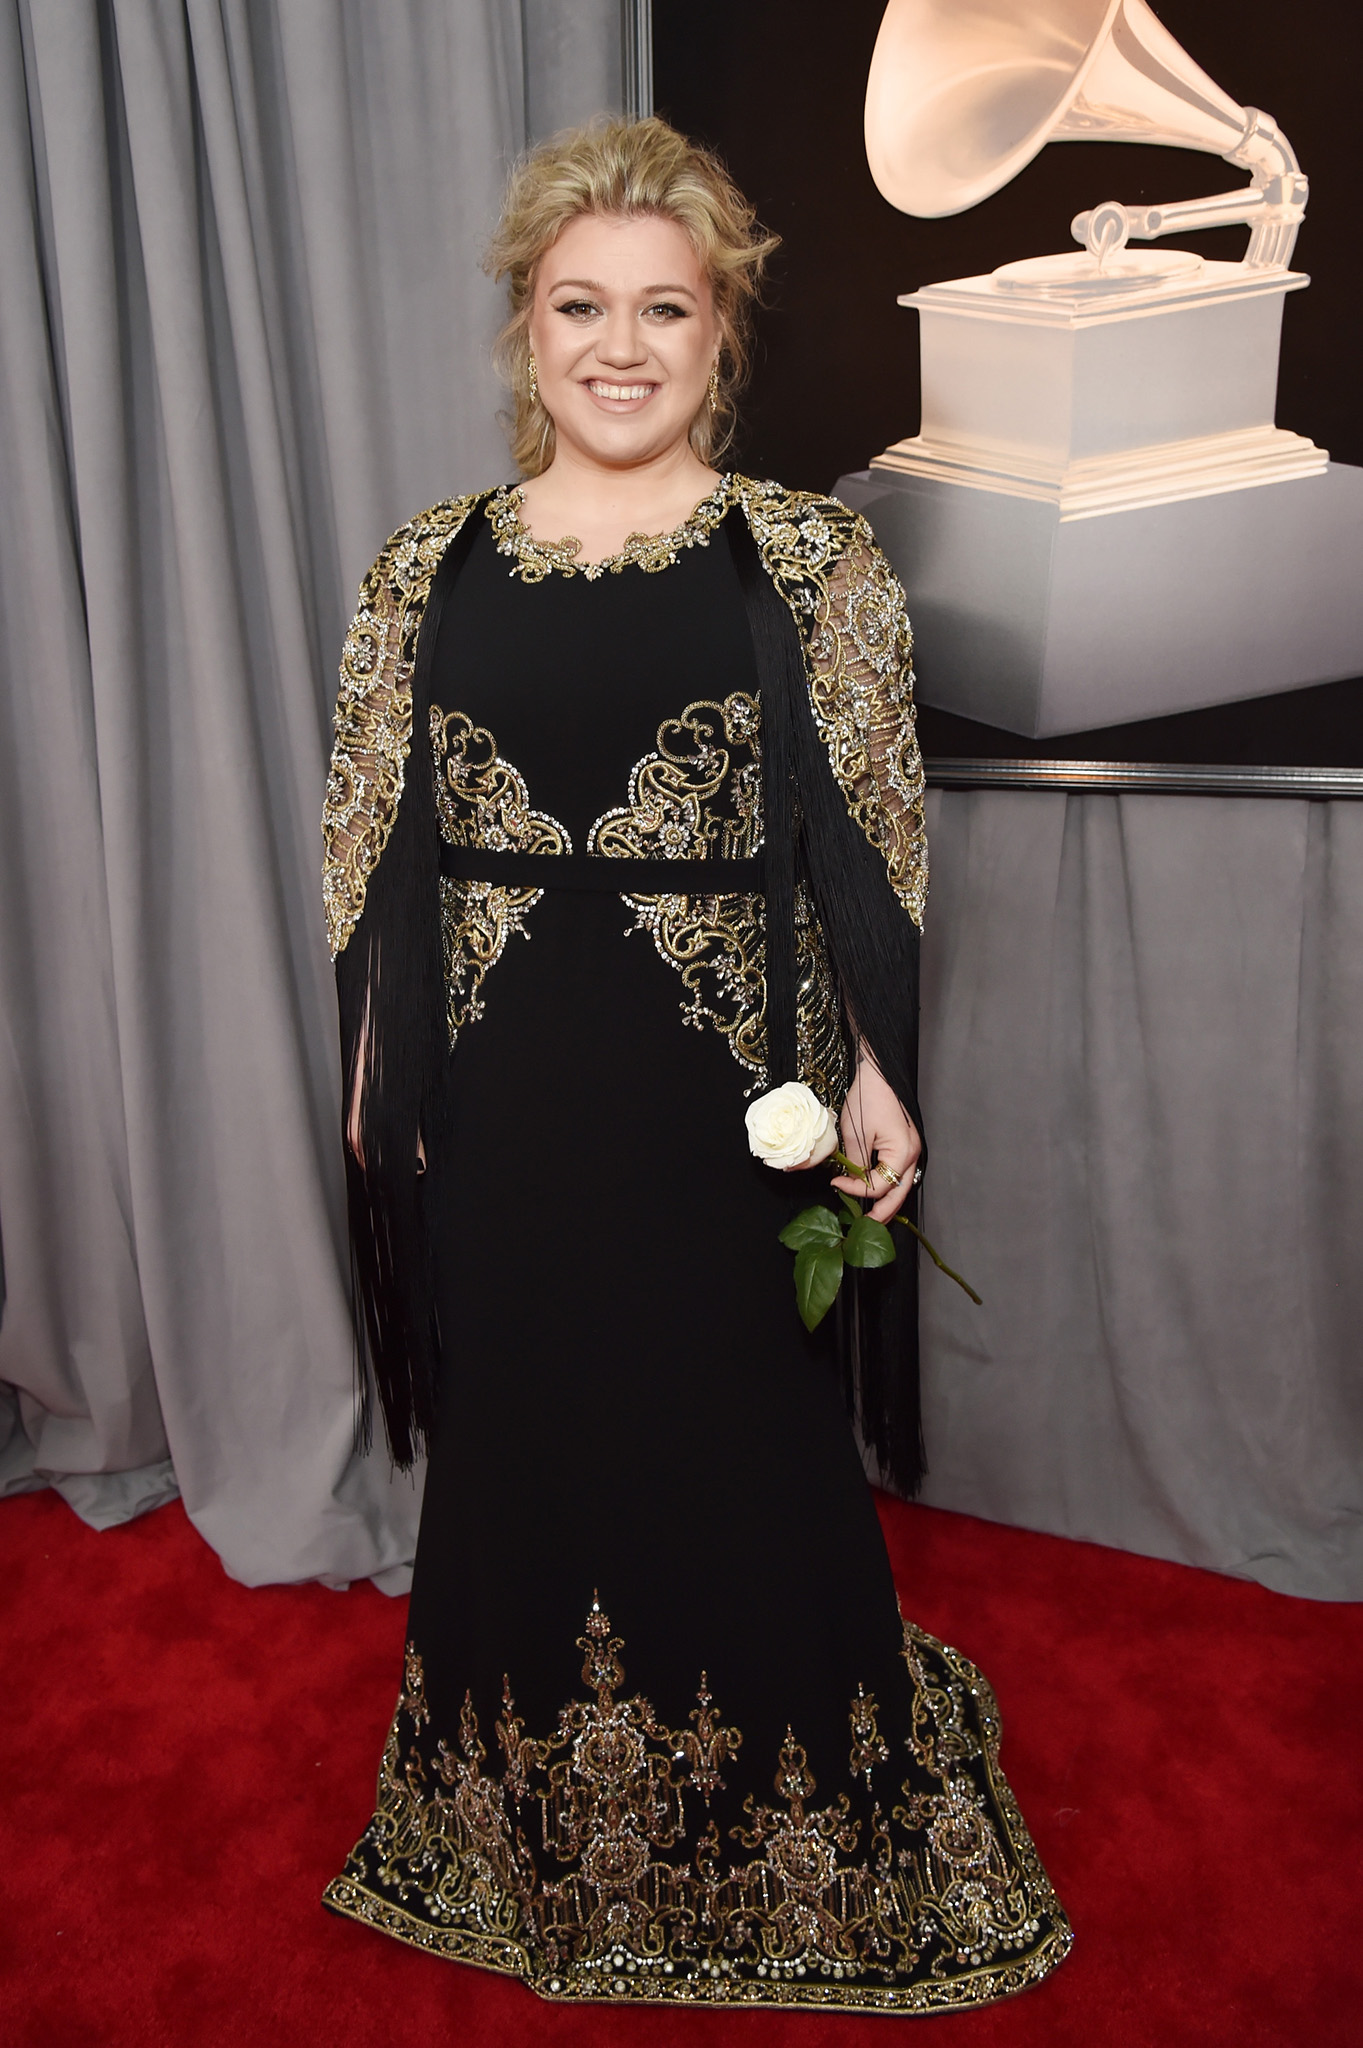 Recording artist Kelly Clarkson, white rose detail, attends the 60th Annual GRAMMY Awards at Madison Square Garden on January 28, 2018 in New York City.